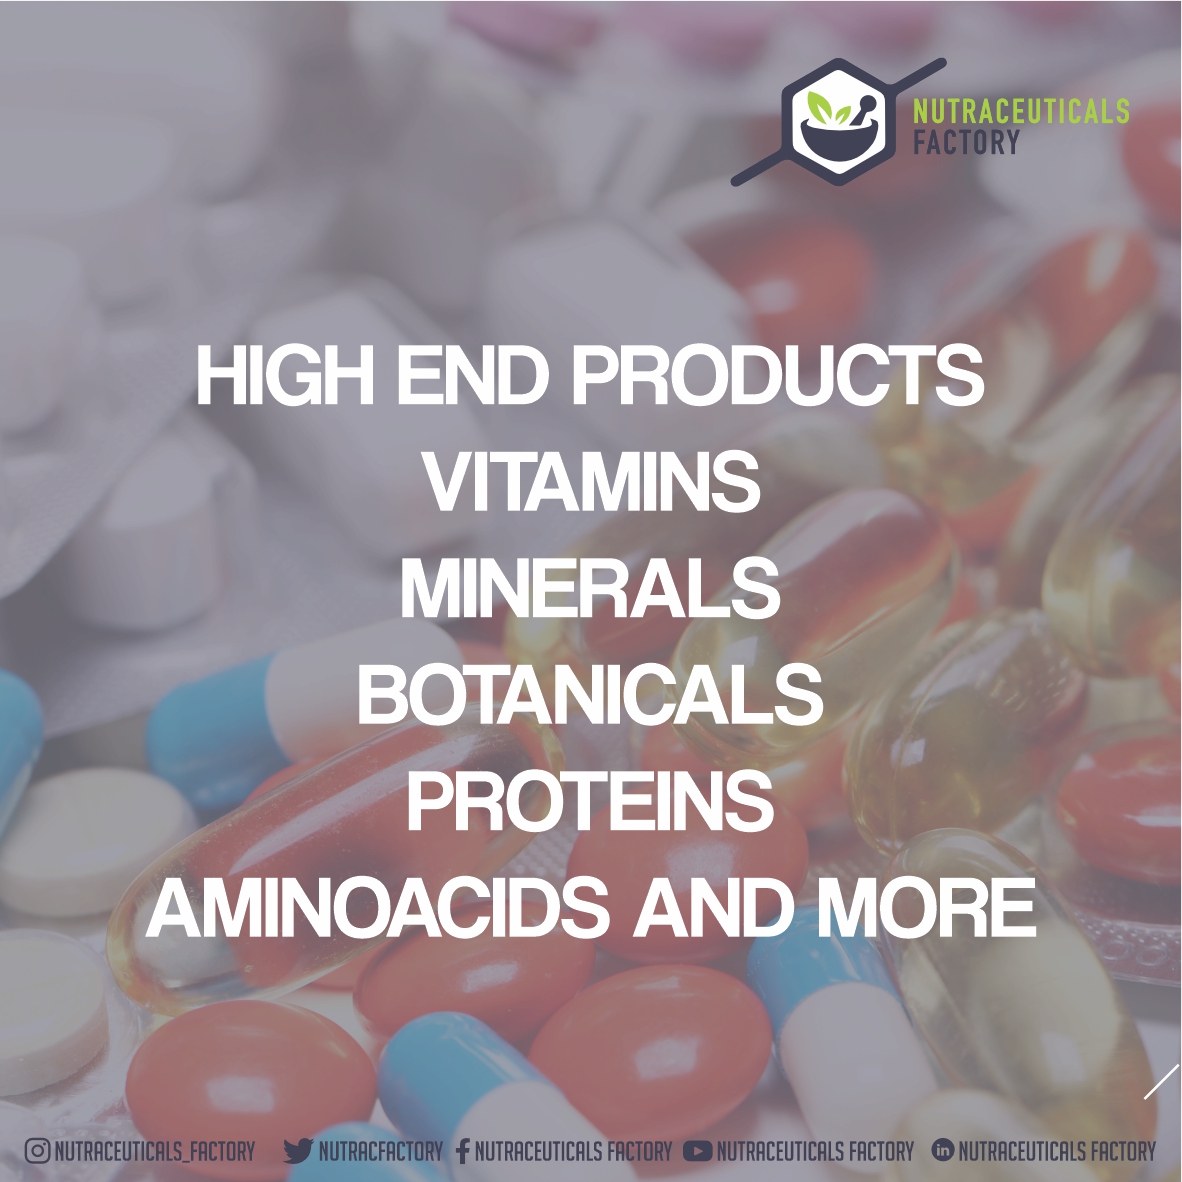 Do you want more information? contact us by CALL US: +1 727 692-7294 info@nutraceuticalsfactory.com
#NutraceuticalsFactory #Nutraceuticals #usa #florida #privatelabeling #productdevelopment #manufacturing #privatelabelnutraceuticals #nutraceuticalsupplement #manufacturer